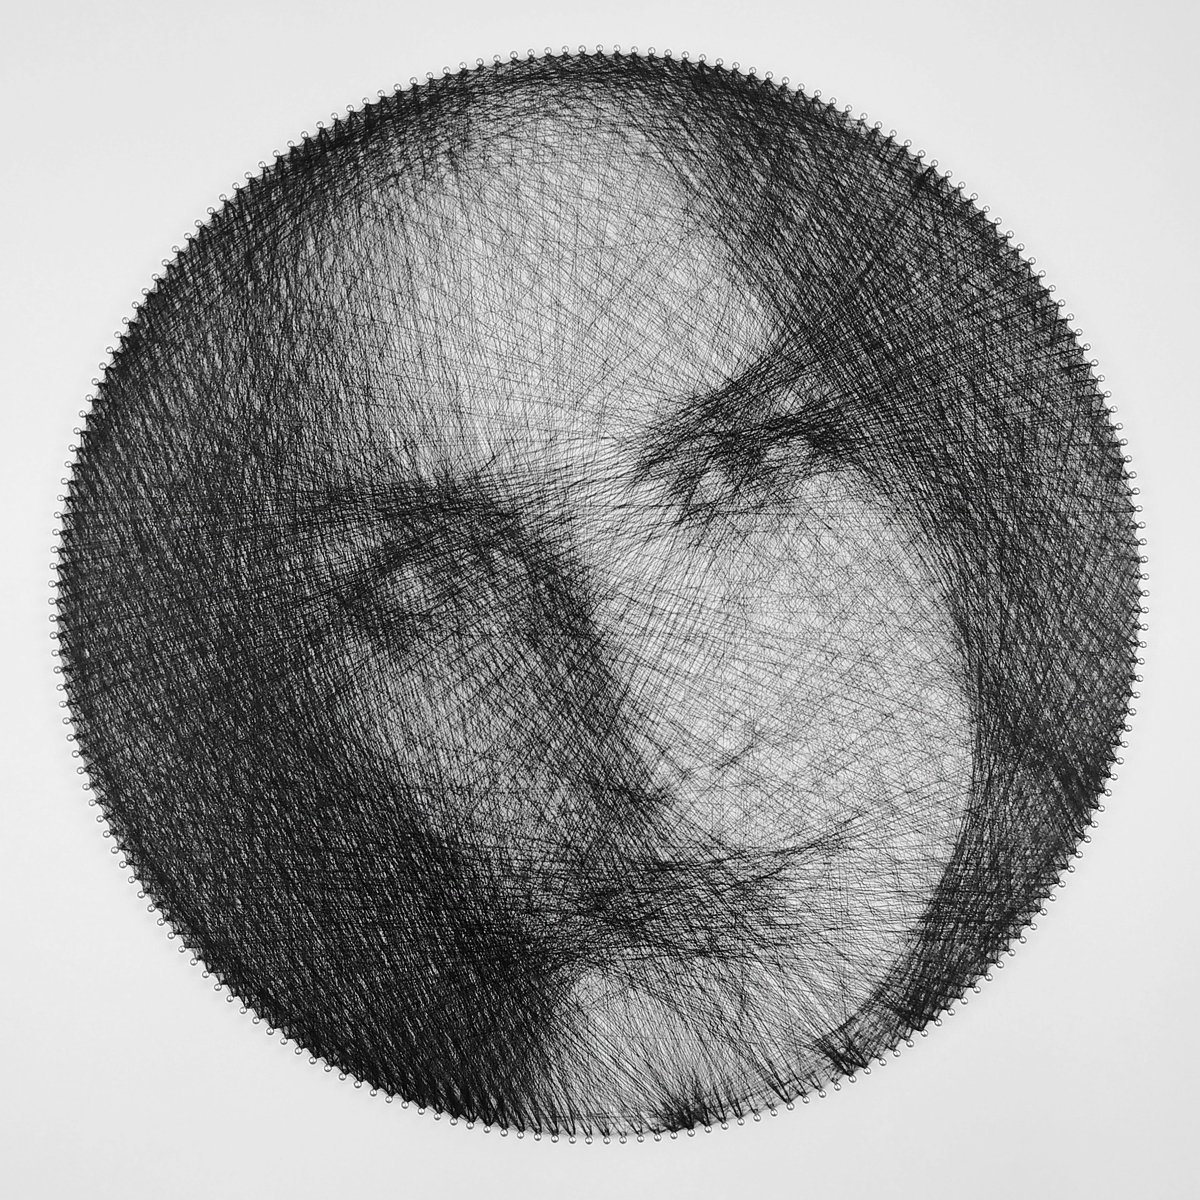 String Art Portrait of a Woman by Andrey Saharov